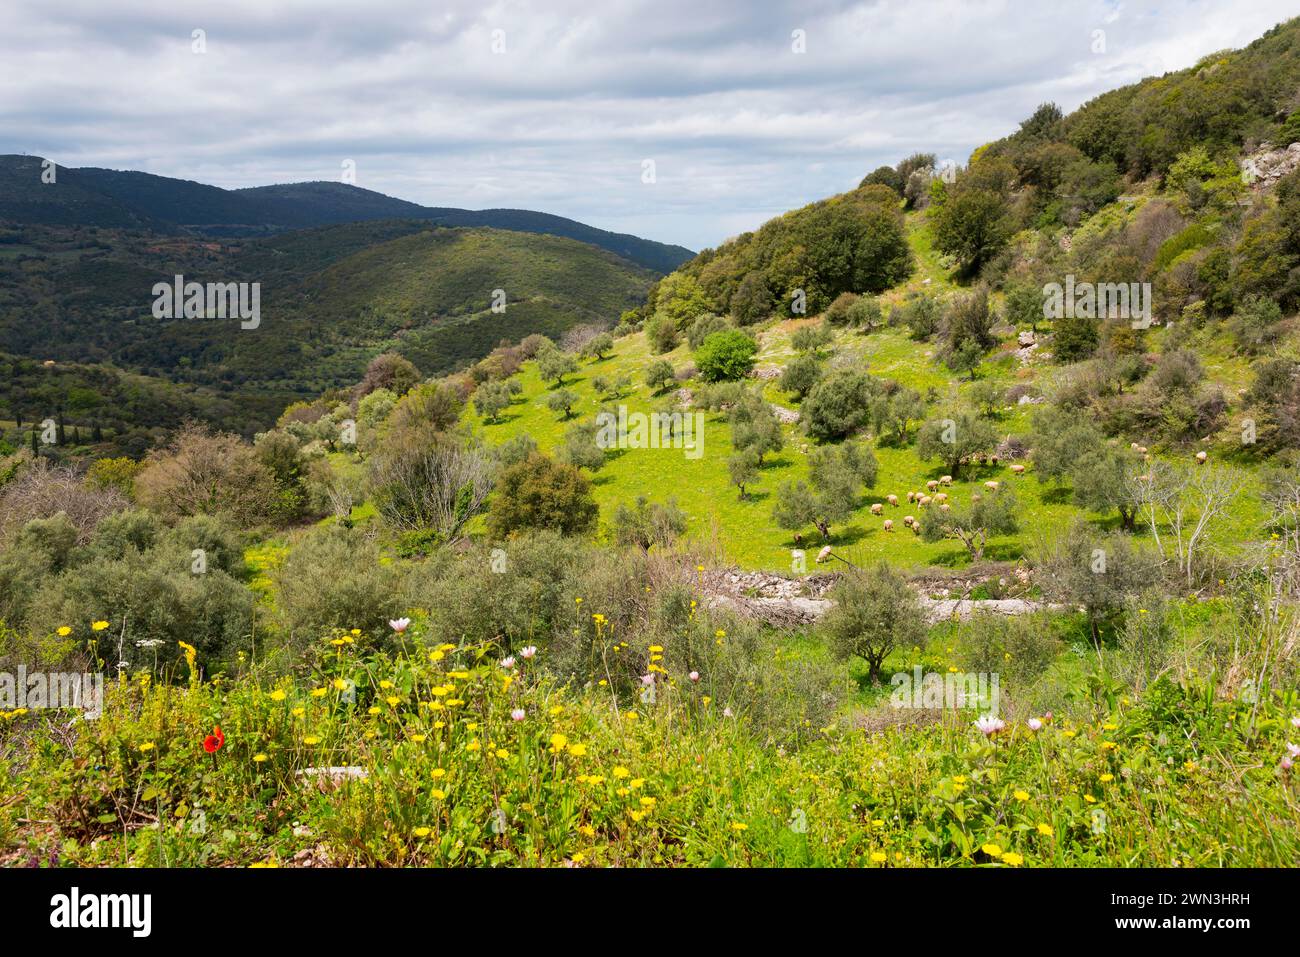 Natural landscape with green fields, forests and a cloudy sky radiating peace and space, near Platania, Peloponnese, Greece Stock Photo